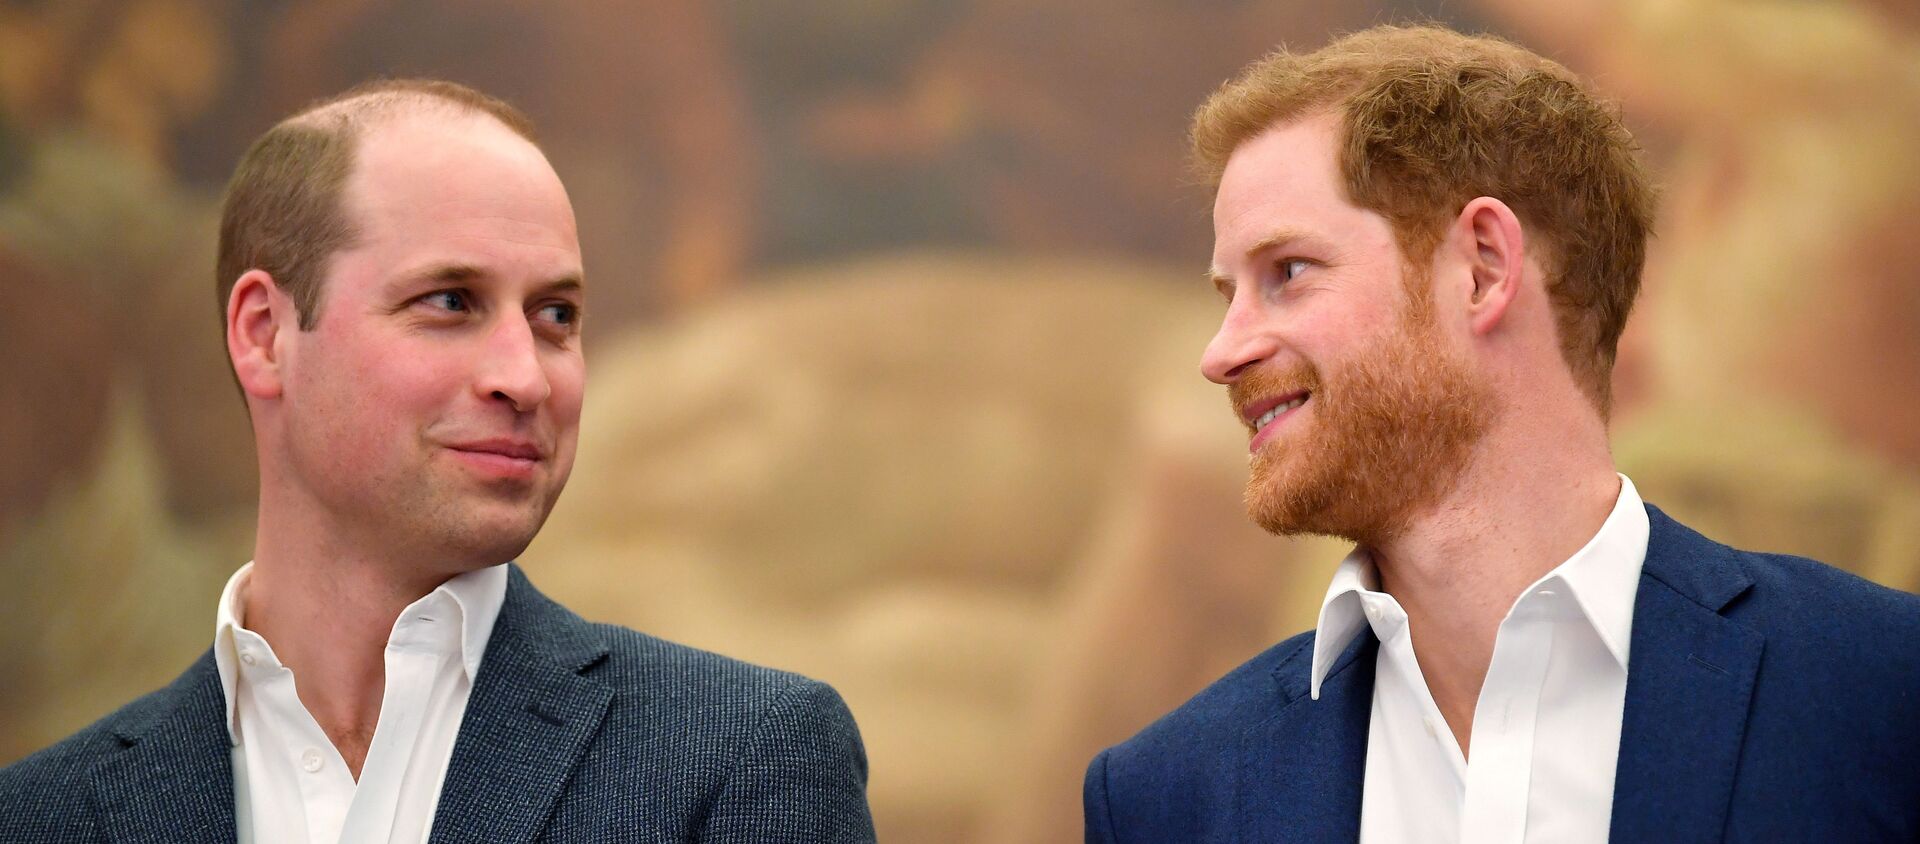 Britain's Prince William and Prince Harry attend the opening of the Greenhouse Sports Centre in central London, April 26, 2018 - Sputnik International, 1920, 01.07.2021